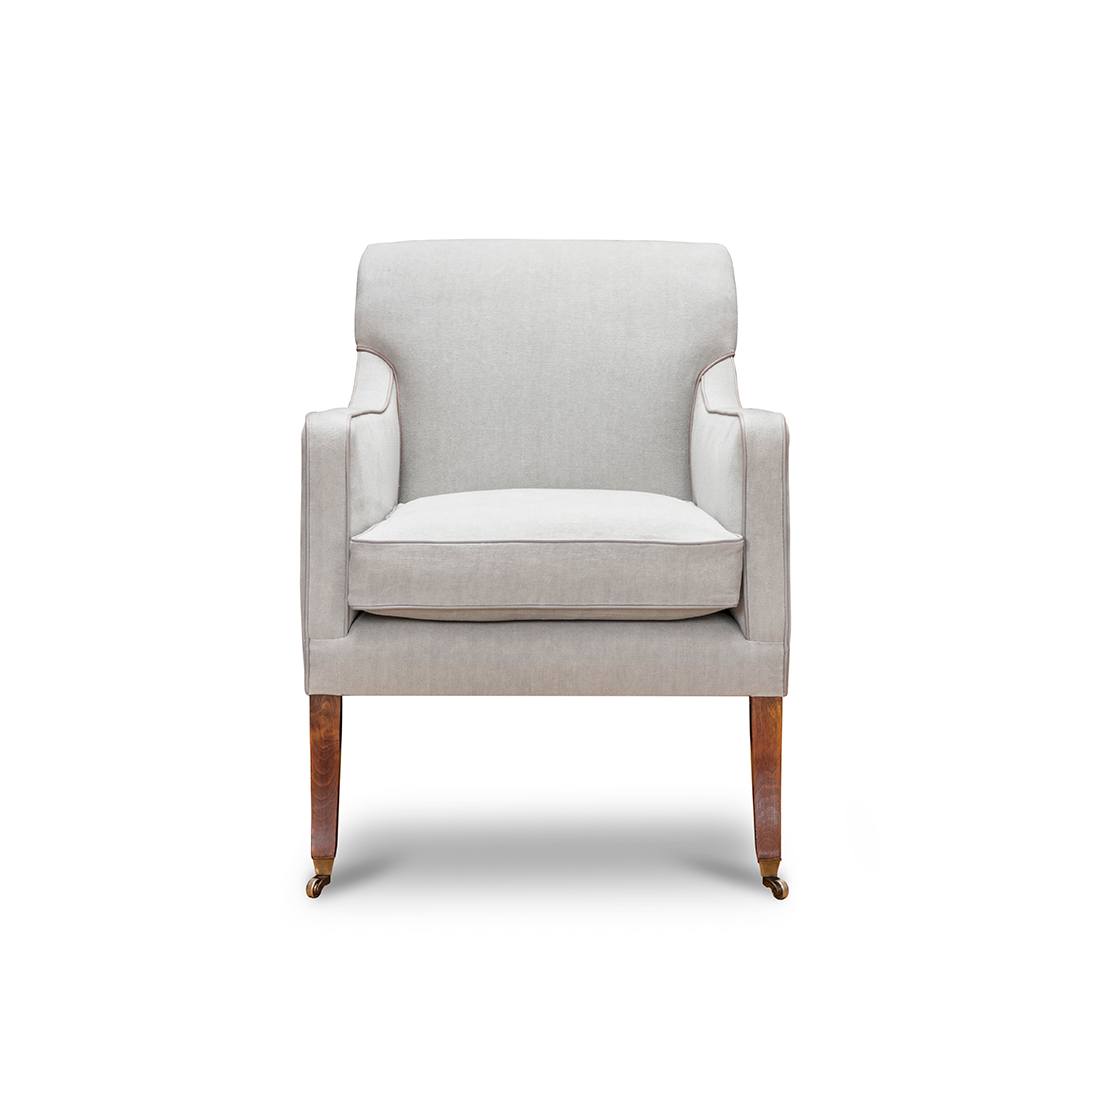 Compton chair in Orkney linen - Cement with Siena leather piping - Beaumont & Fletcher